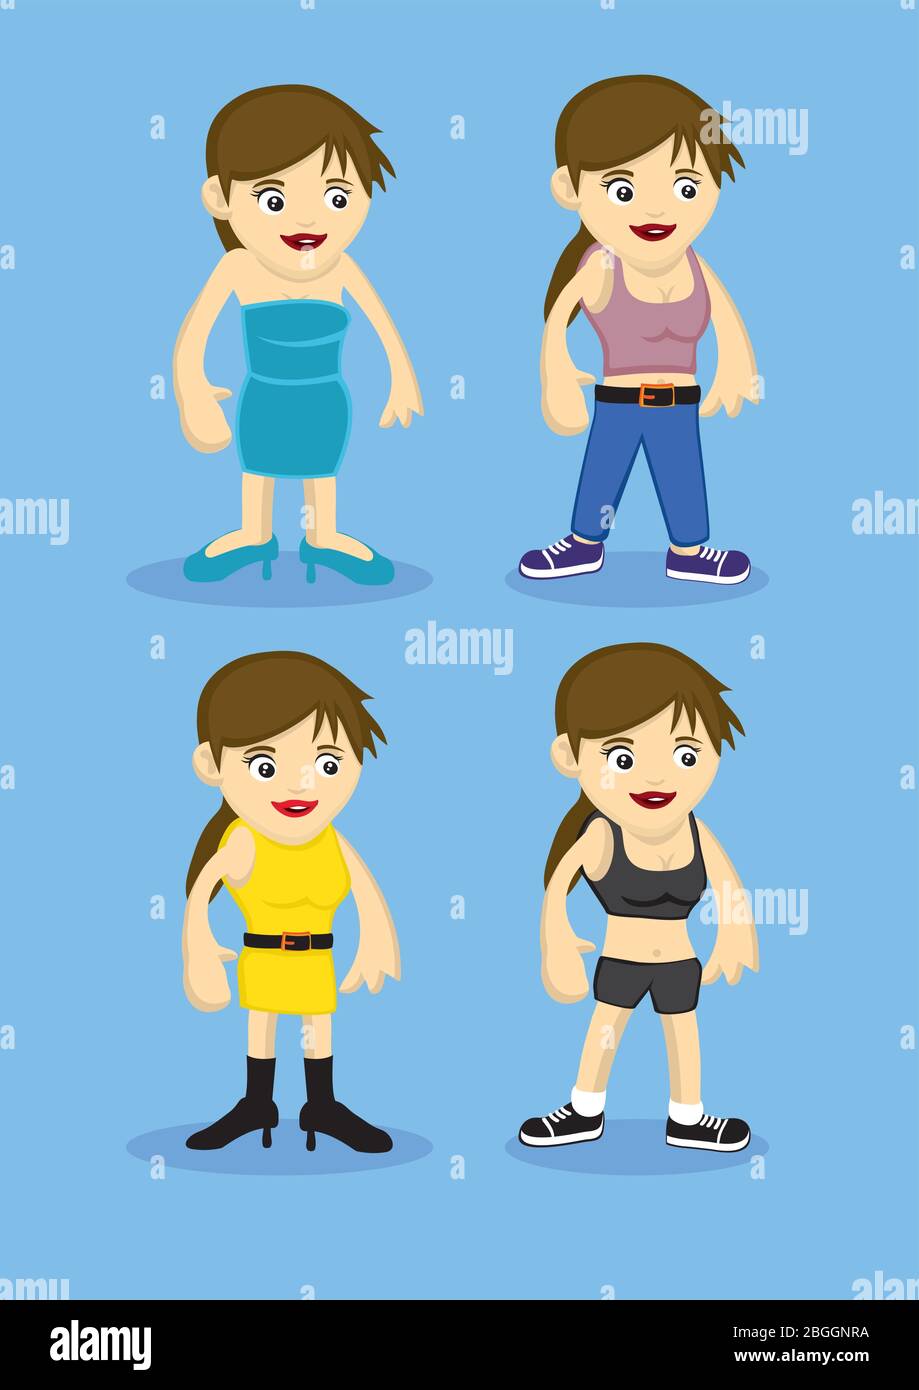 Fashion design vector illustration for cartoon woman of different roles and activities. Cute female characters isolated on blue background Stock Vector